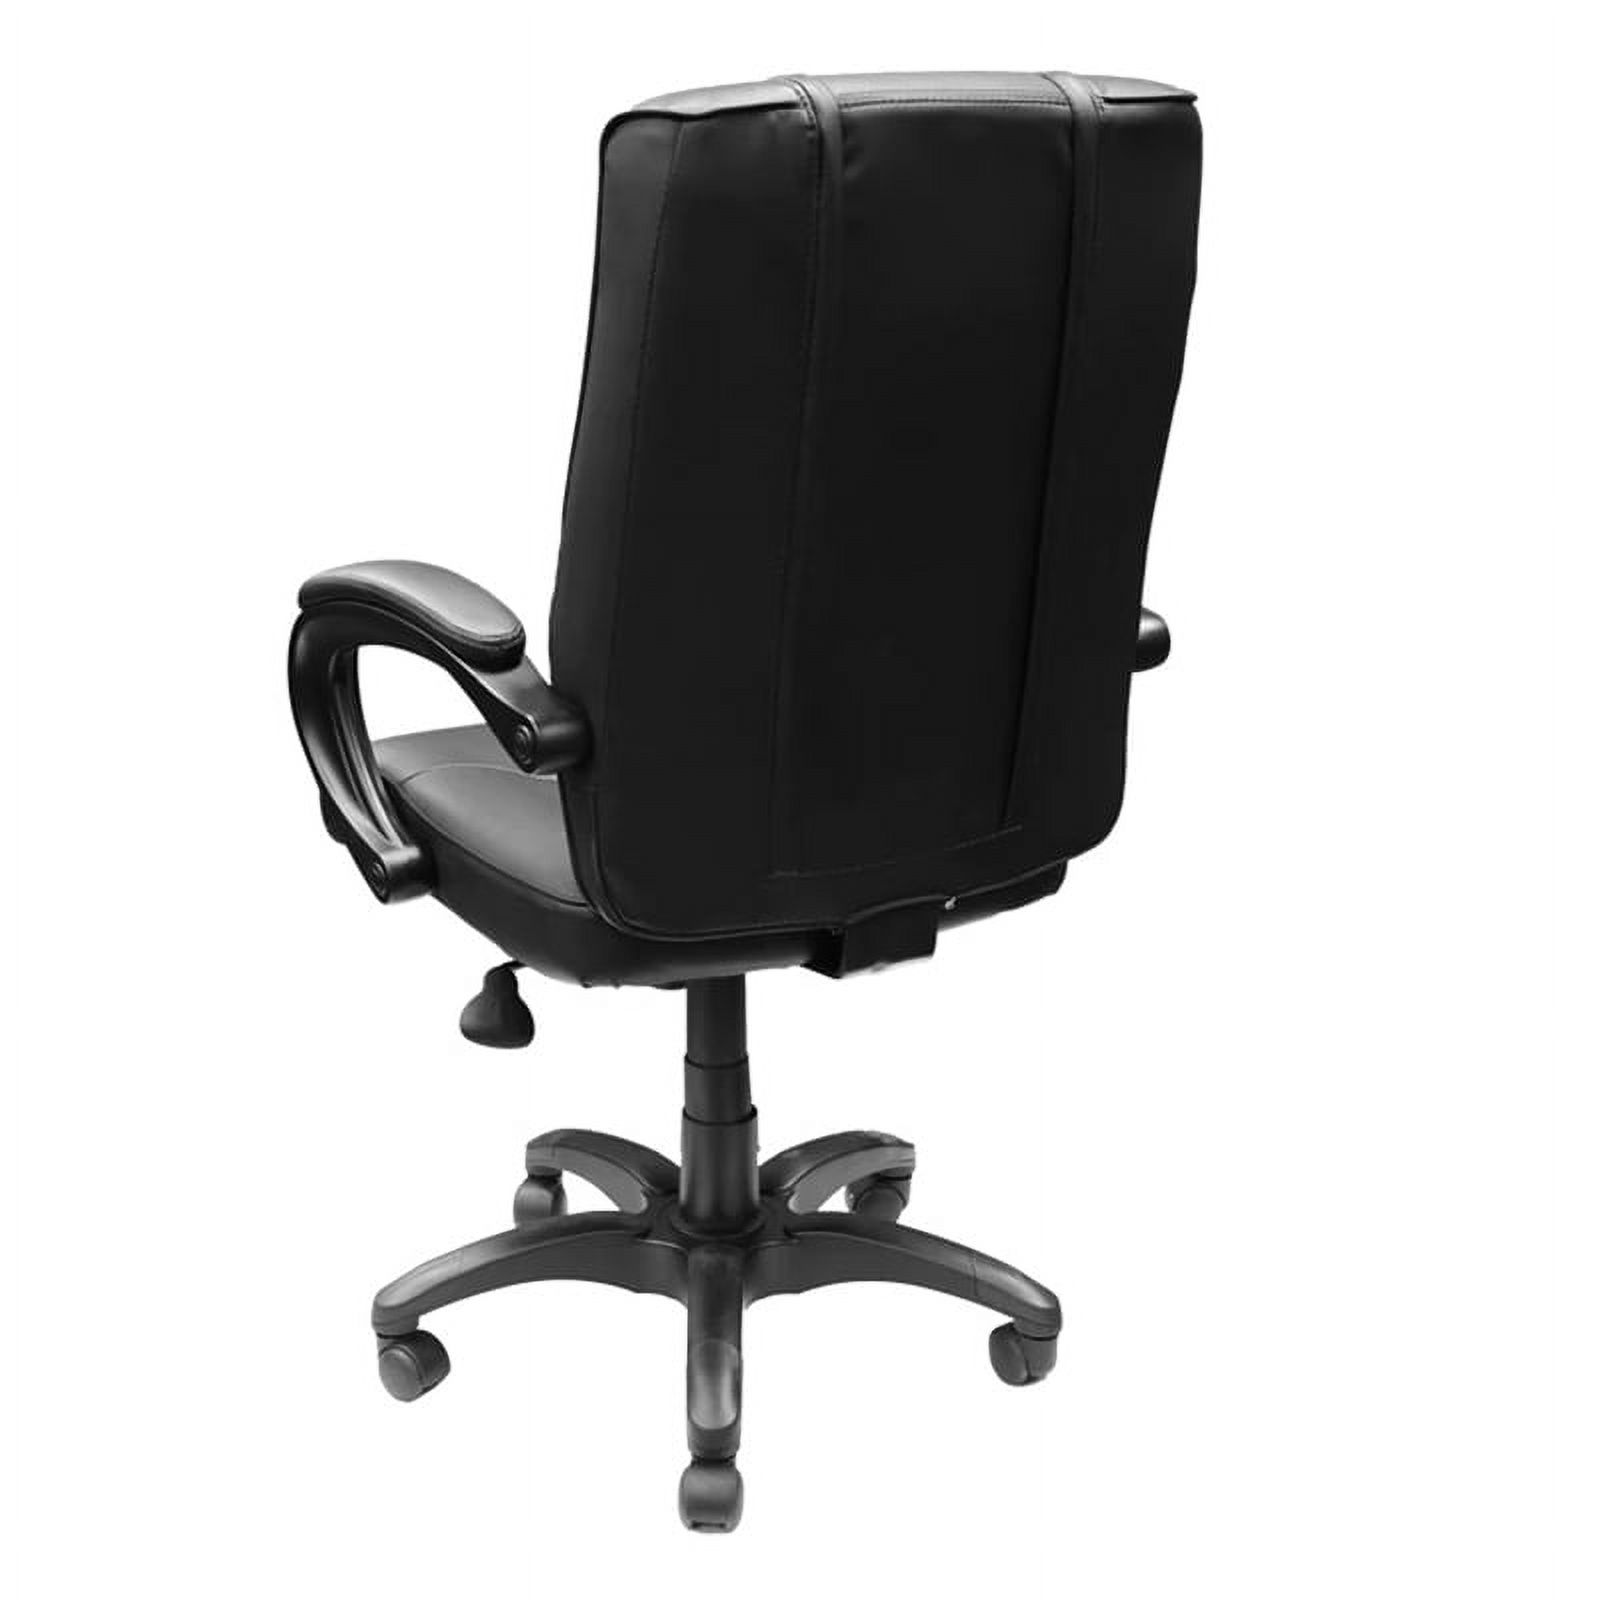 Houston Texans Office Chair 1000 - image 3 of 4